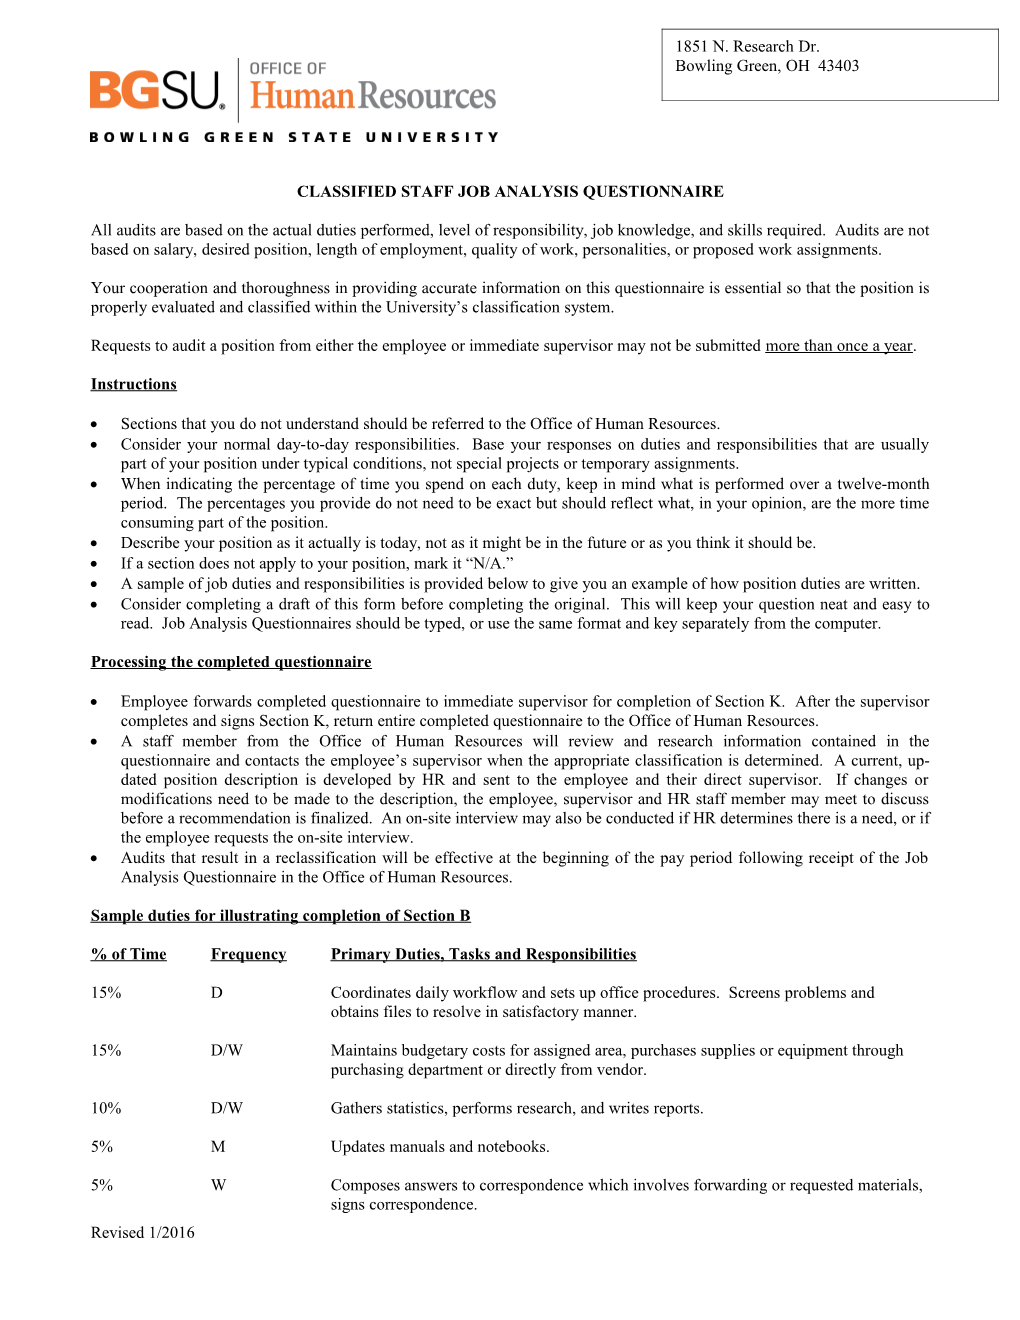 Classified Staff Job Analysis Questionnaire